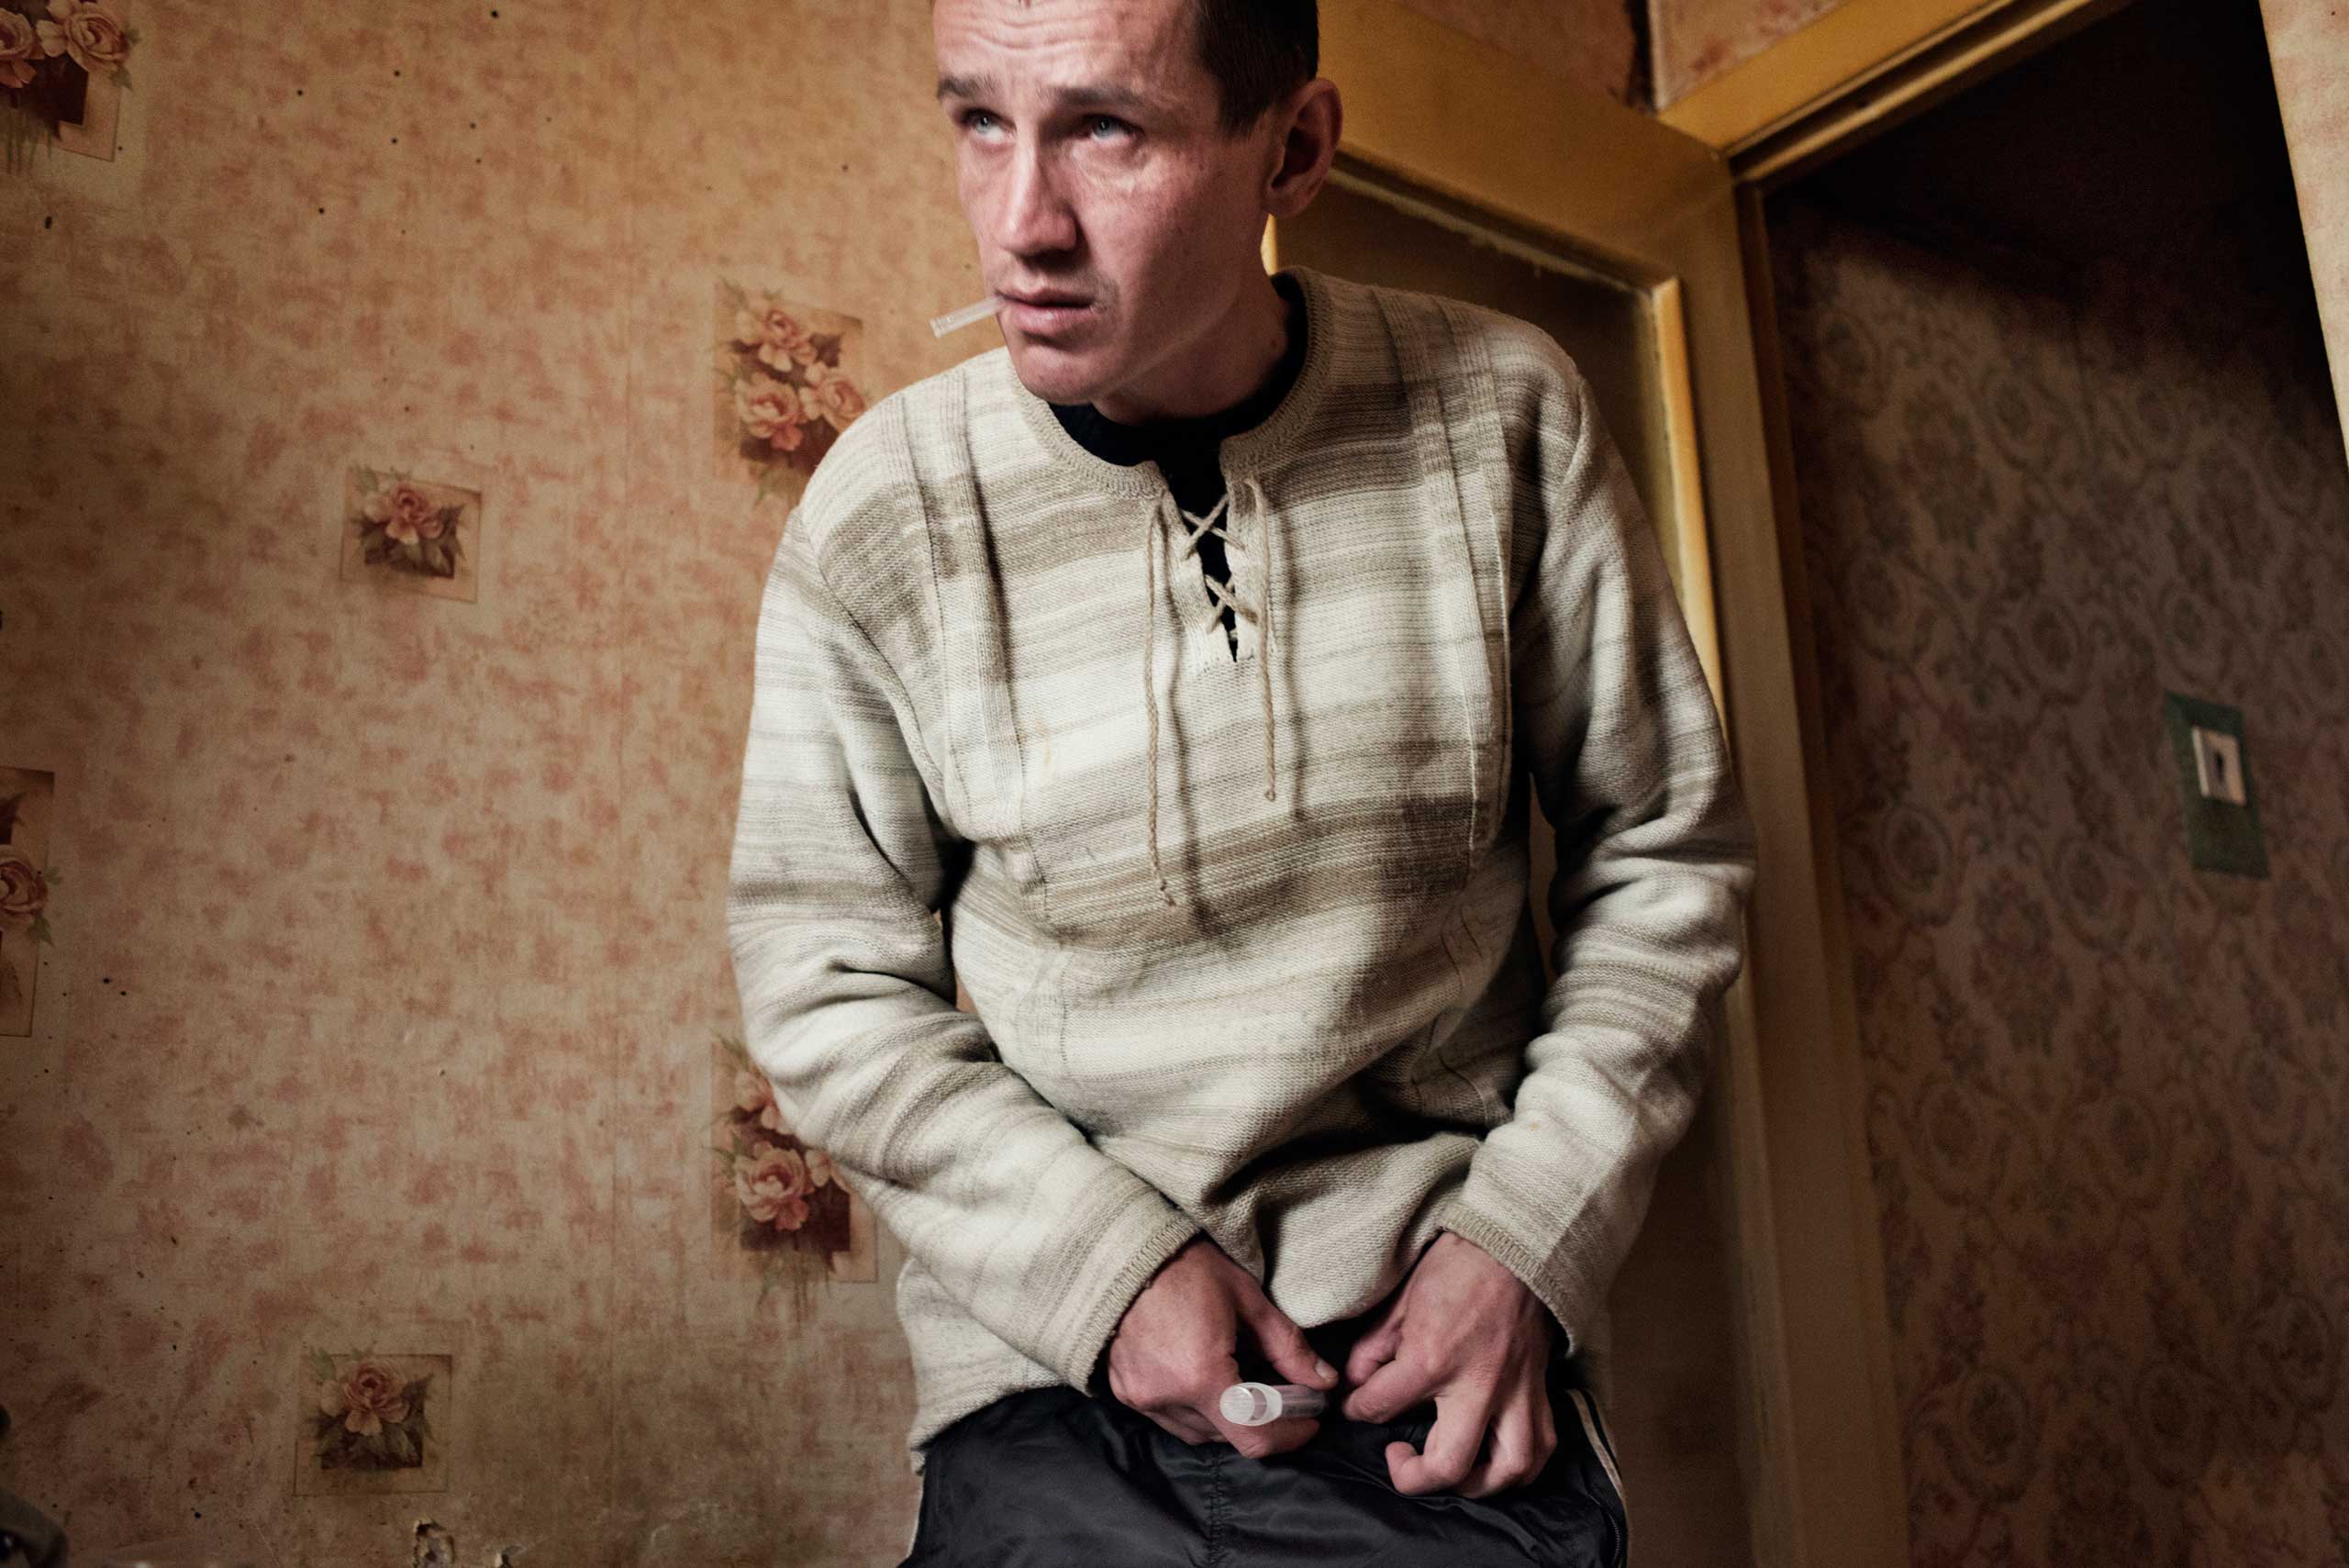 The following photographs were taken in Yekaterinburg, Russia in 2013.
                              
                              Alexei, age 33, injects a dose of krokodil. Because of his dependence on krokodil, Alexei has injuries and swelling around his feet and is forced to walk with a cane.